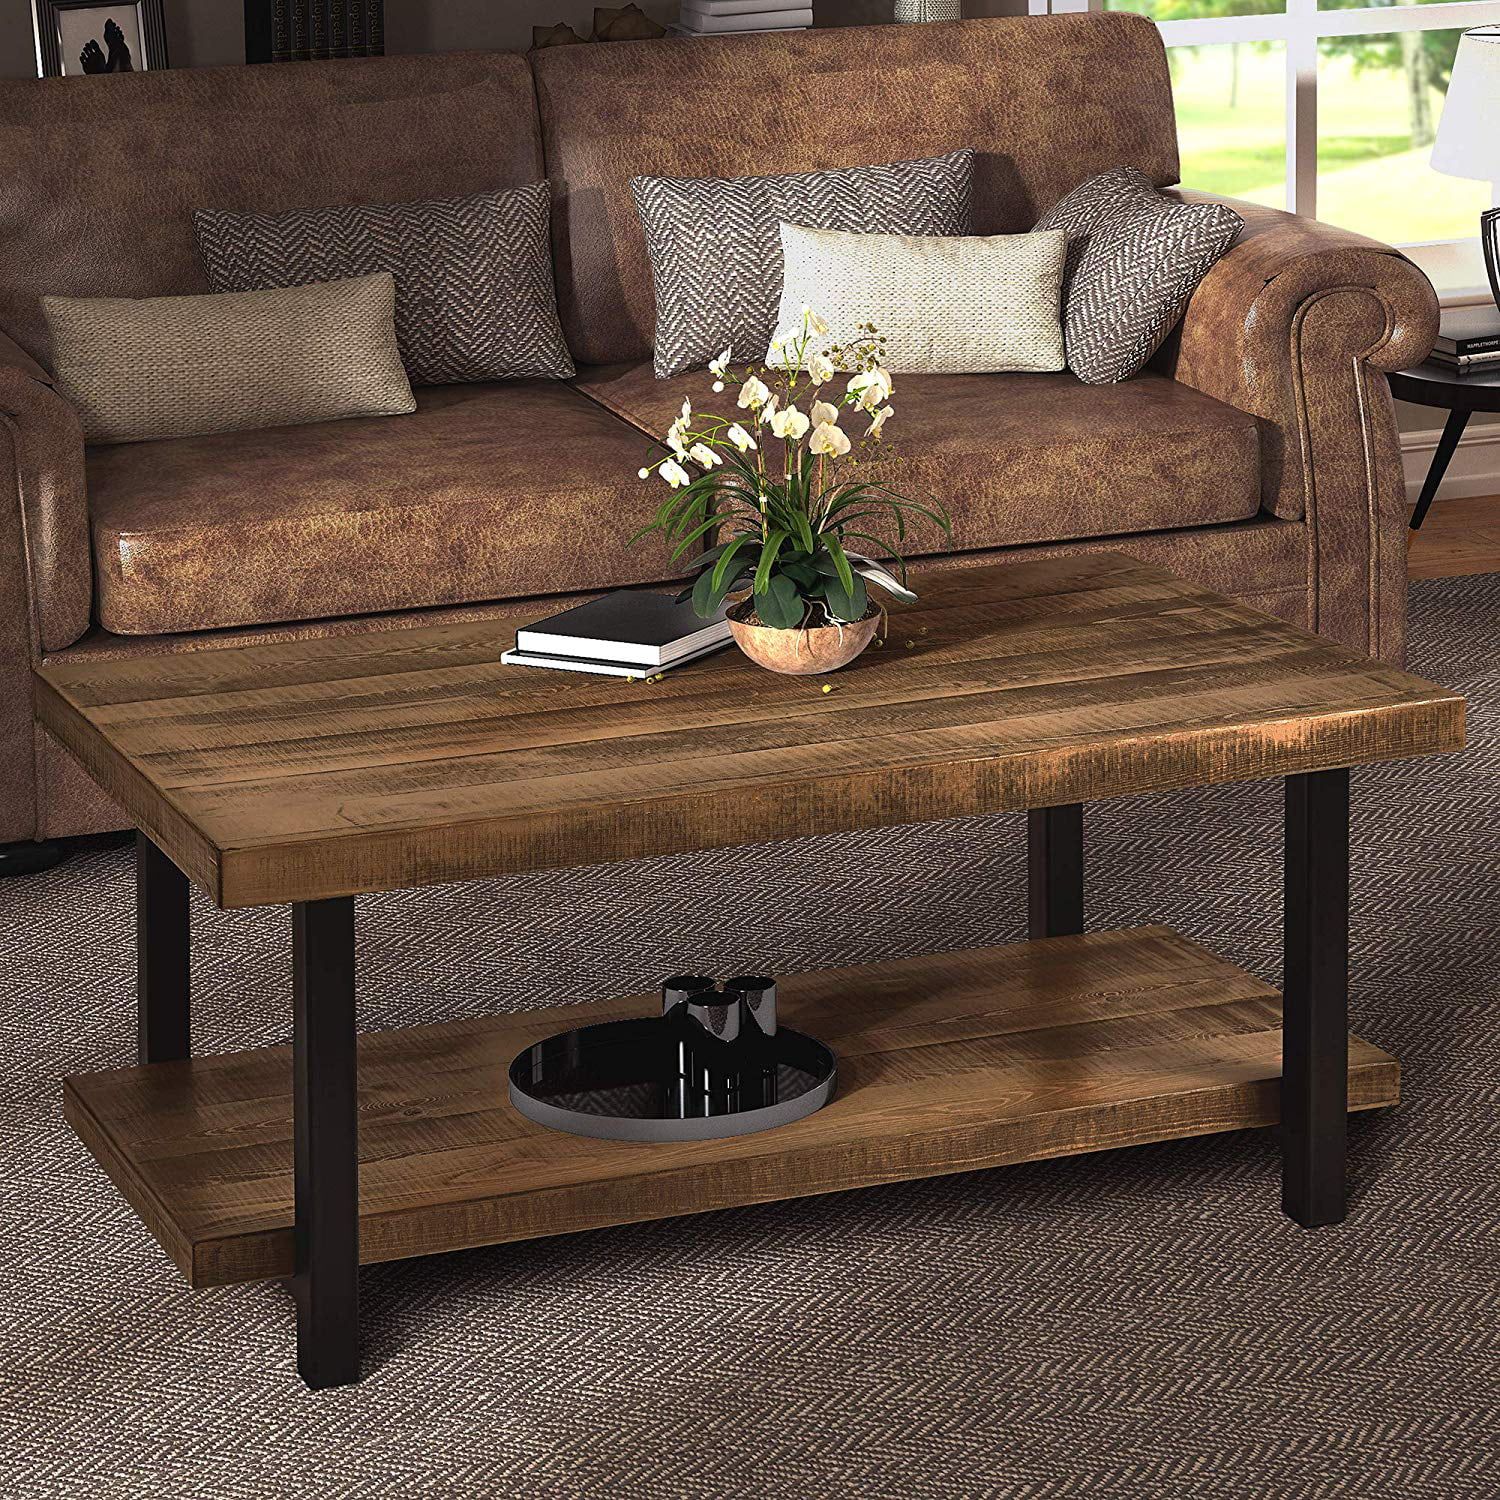 Harper&bright Designs Industrial Rectangular Pine Wood Coffee Table Throughout Rustic Coffee Tables (View 11 of 15)